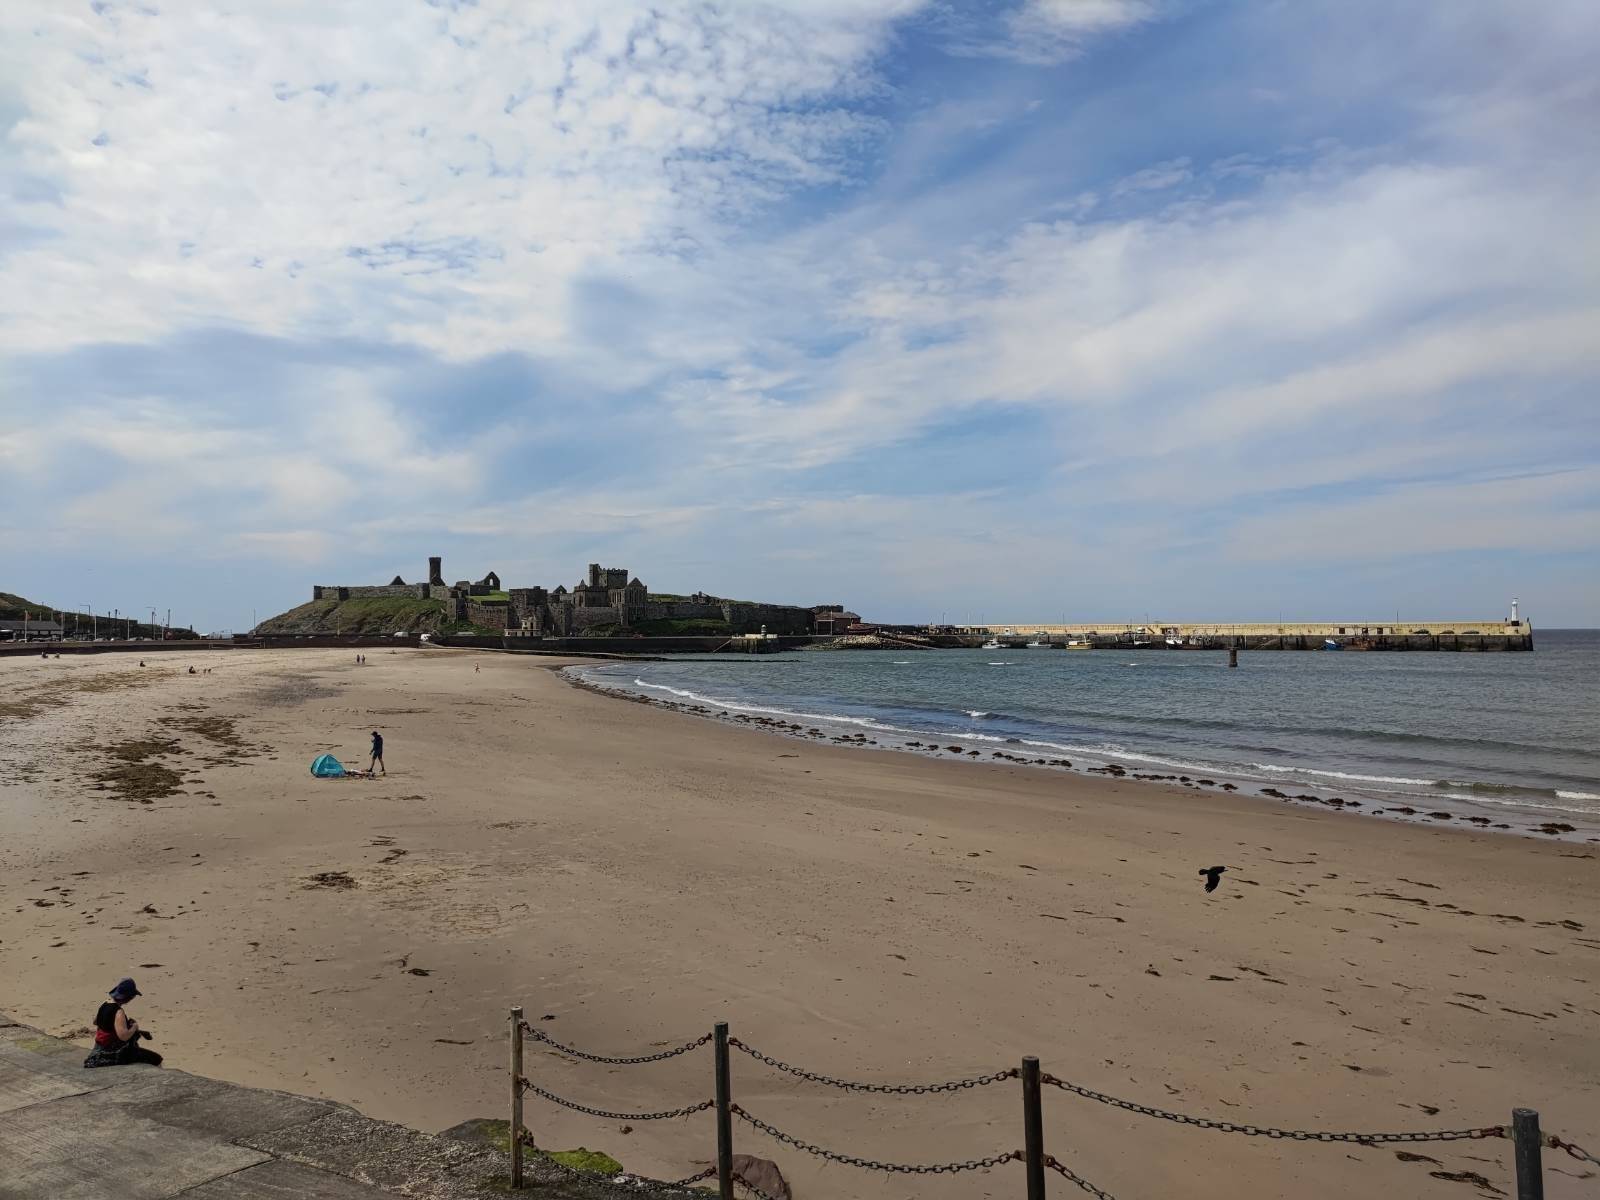 View of Peel beach, with Peel castle and pier in the background